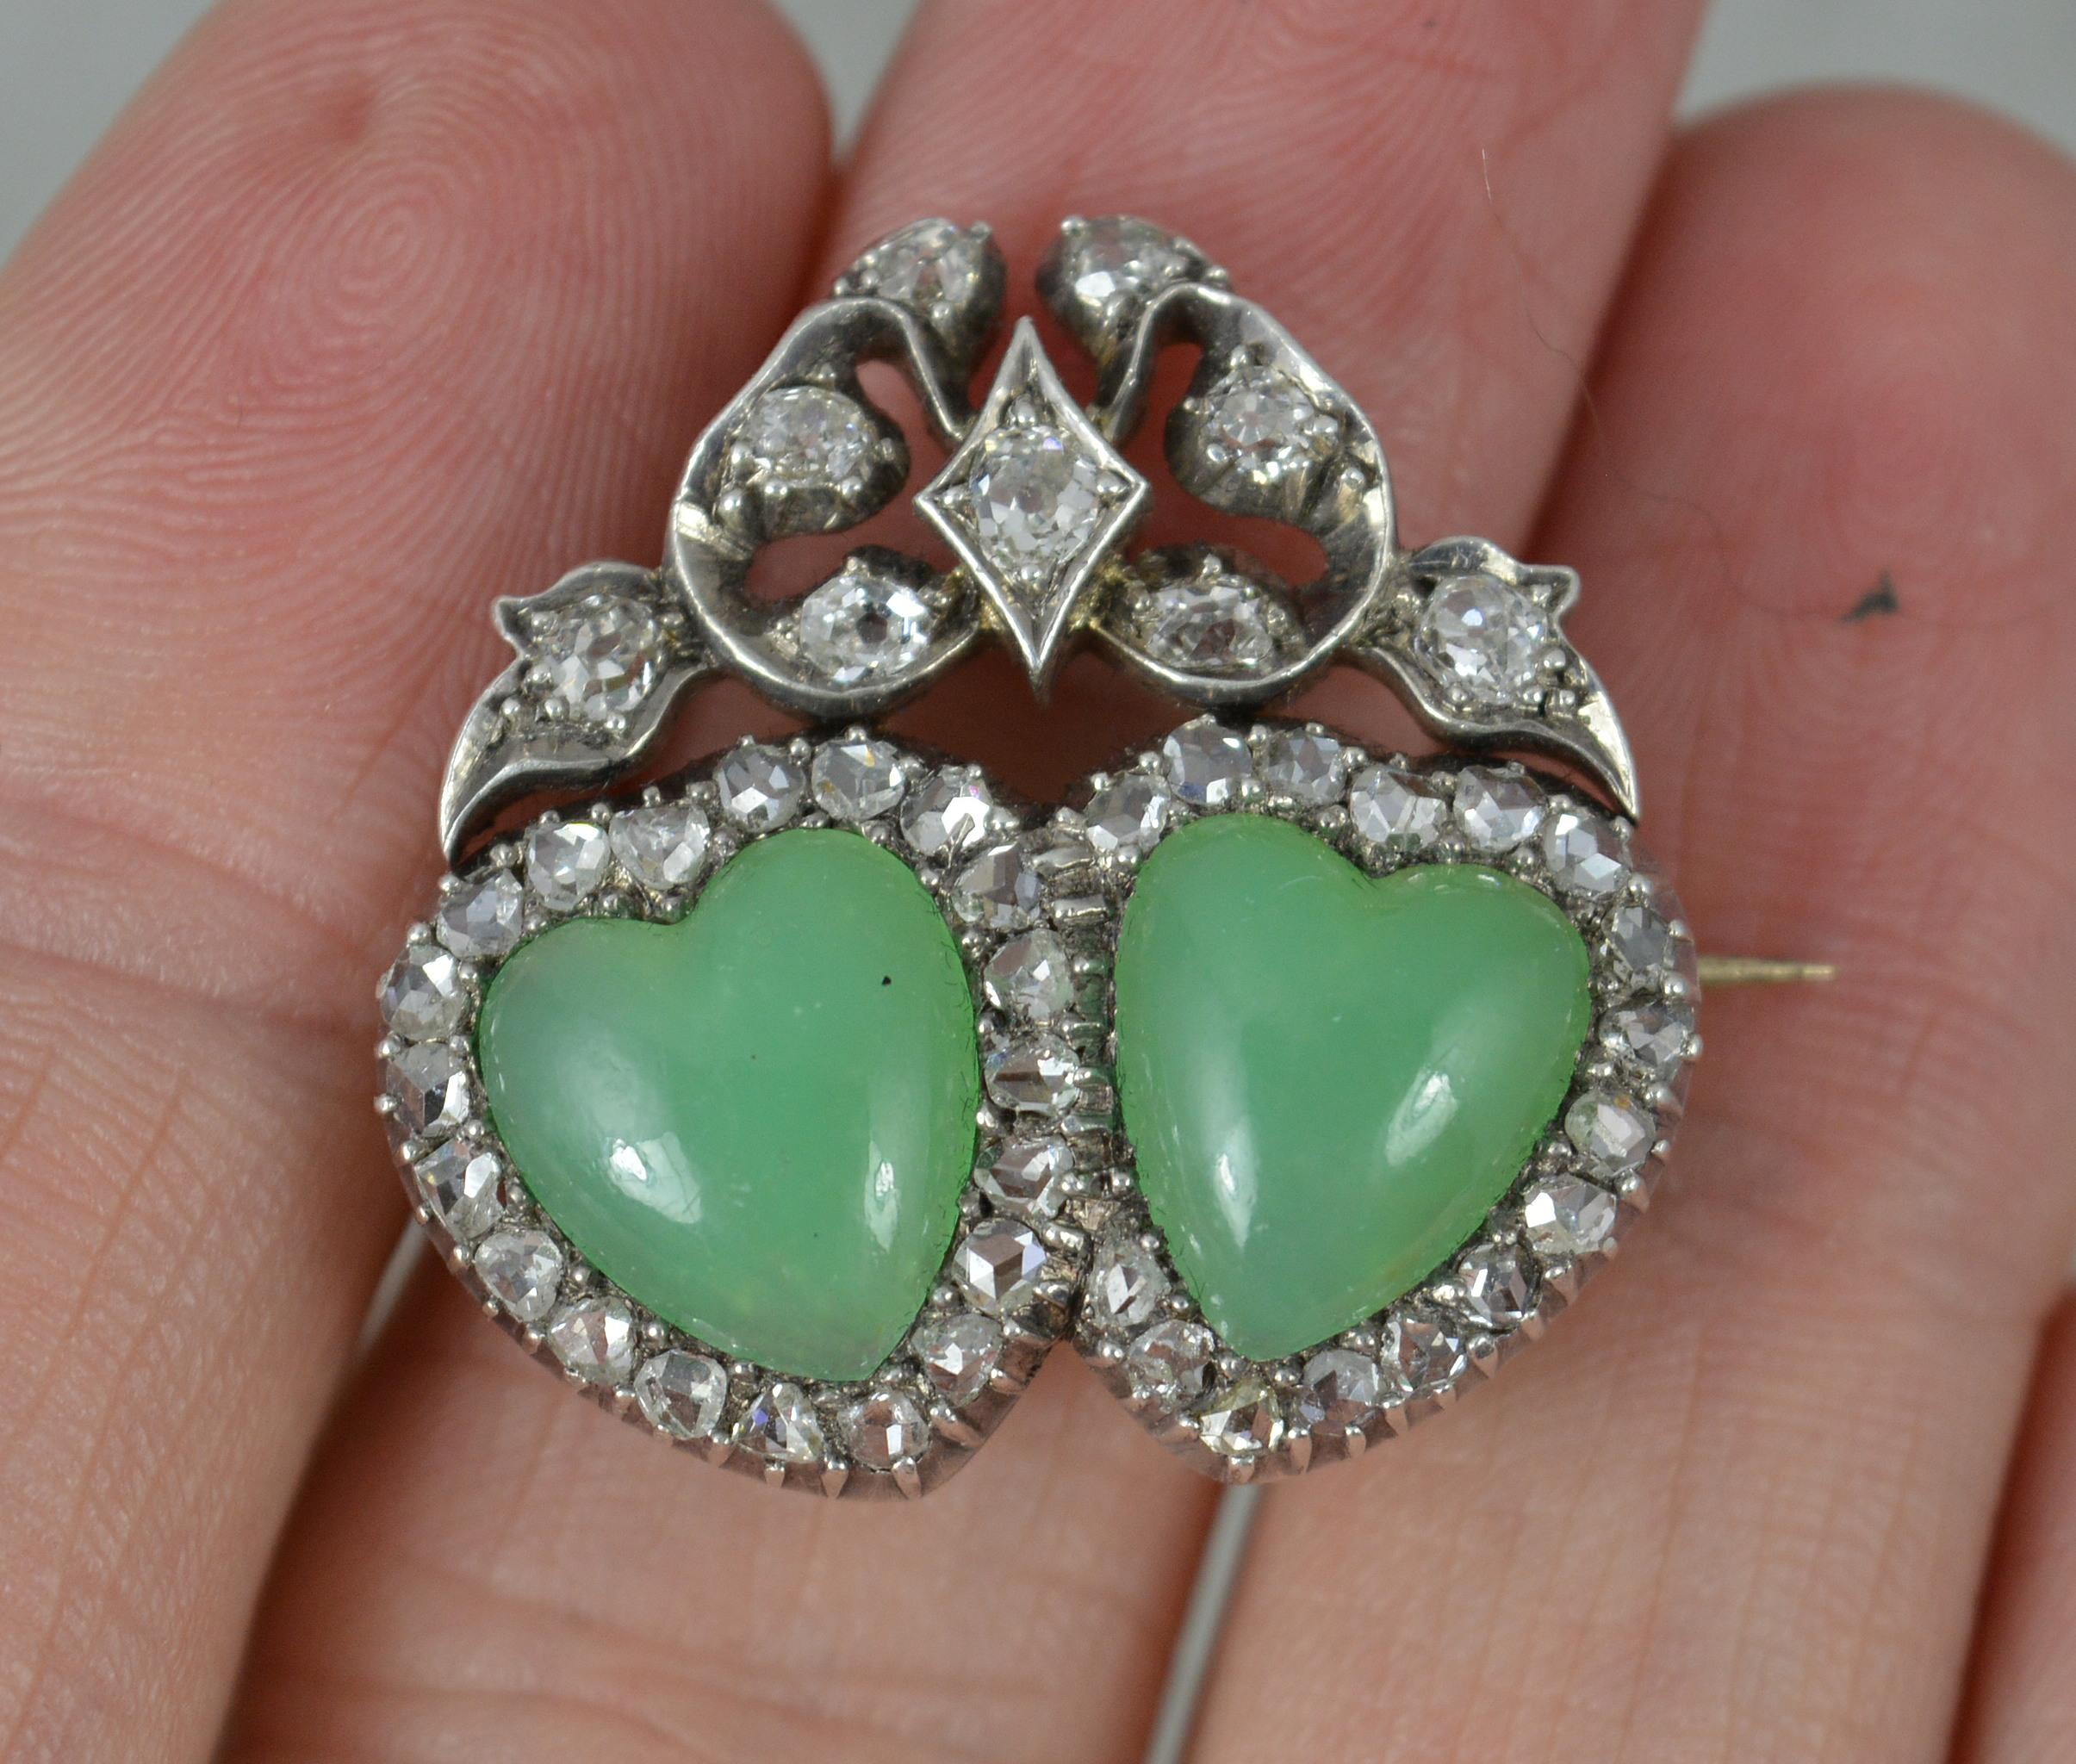 A stunning late Victorian period brooch. c1880.
Solid 15 carat gold example with silver head front setting.
The piece has been designed as two heart shaped chrysoprase stones. 9mm x 10mm each. 
Set with over 40 natural rose and old cut diamonds